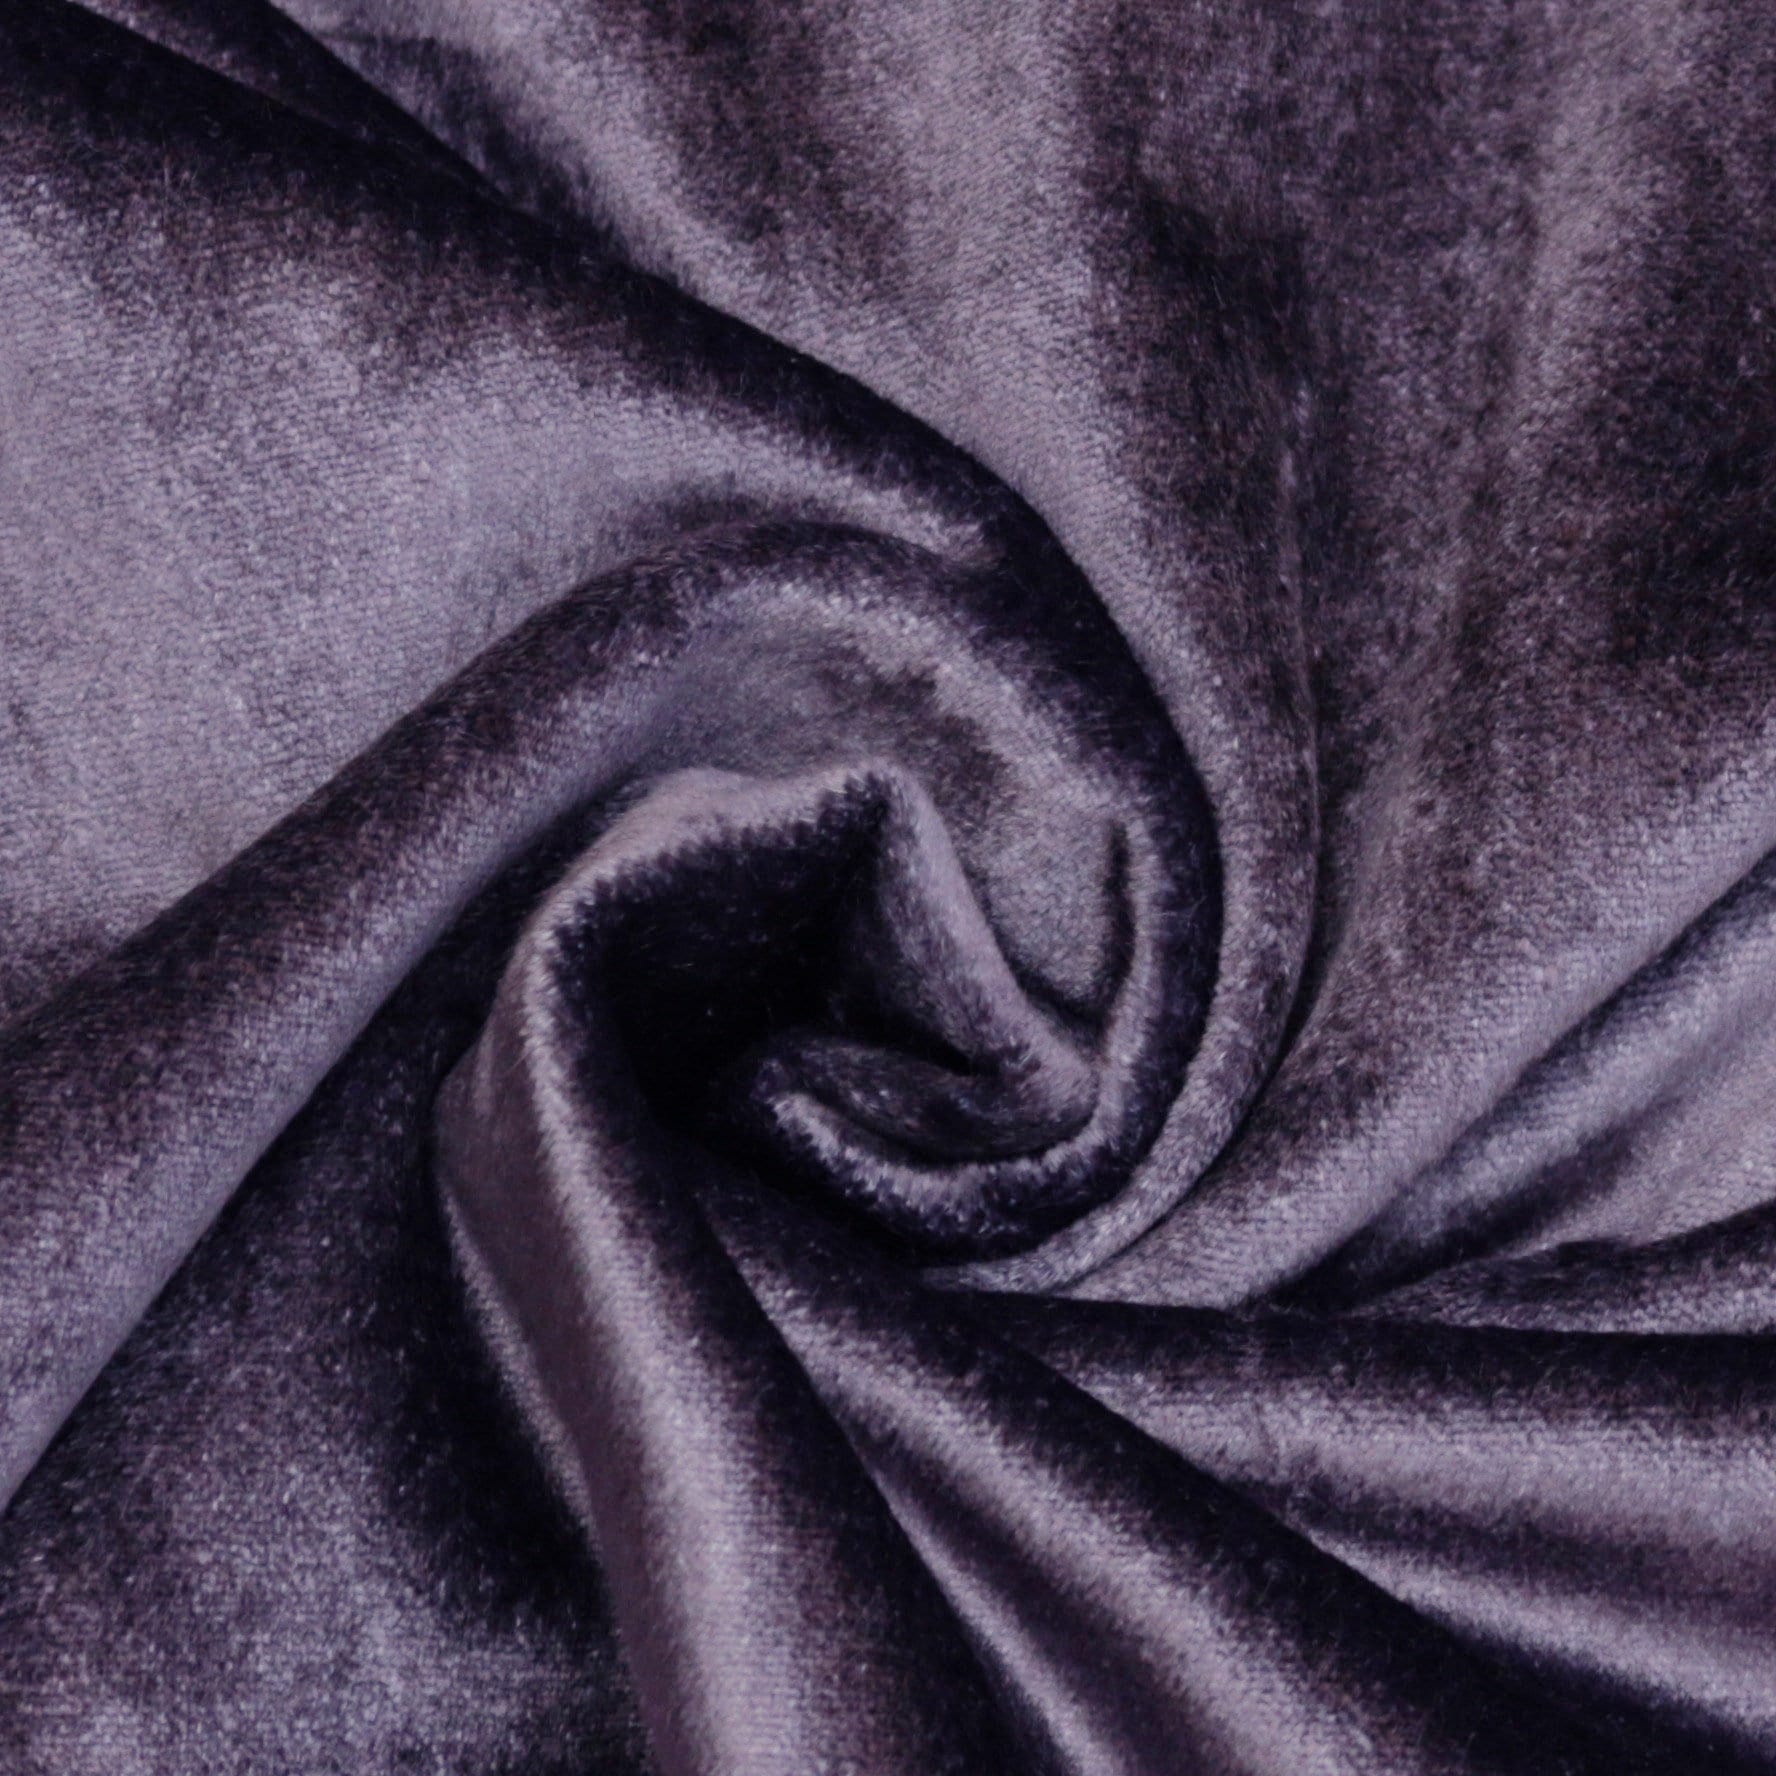 Fabric Mart Direct Dark Purple Cotton Velvet Fabric By The Yard, 54 inches  or 137 cm width, 1 Yard Purple Velvet Fabric, Upholstery Weight Curtain